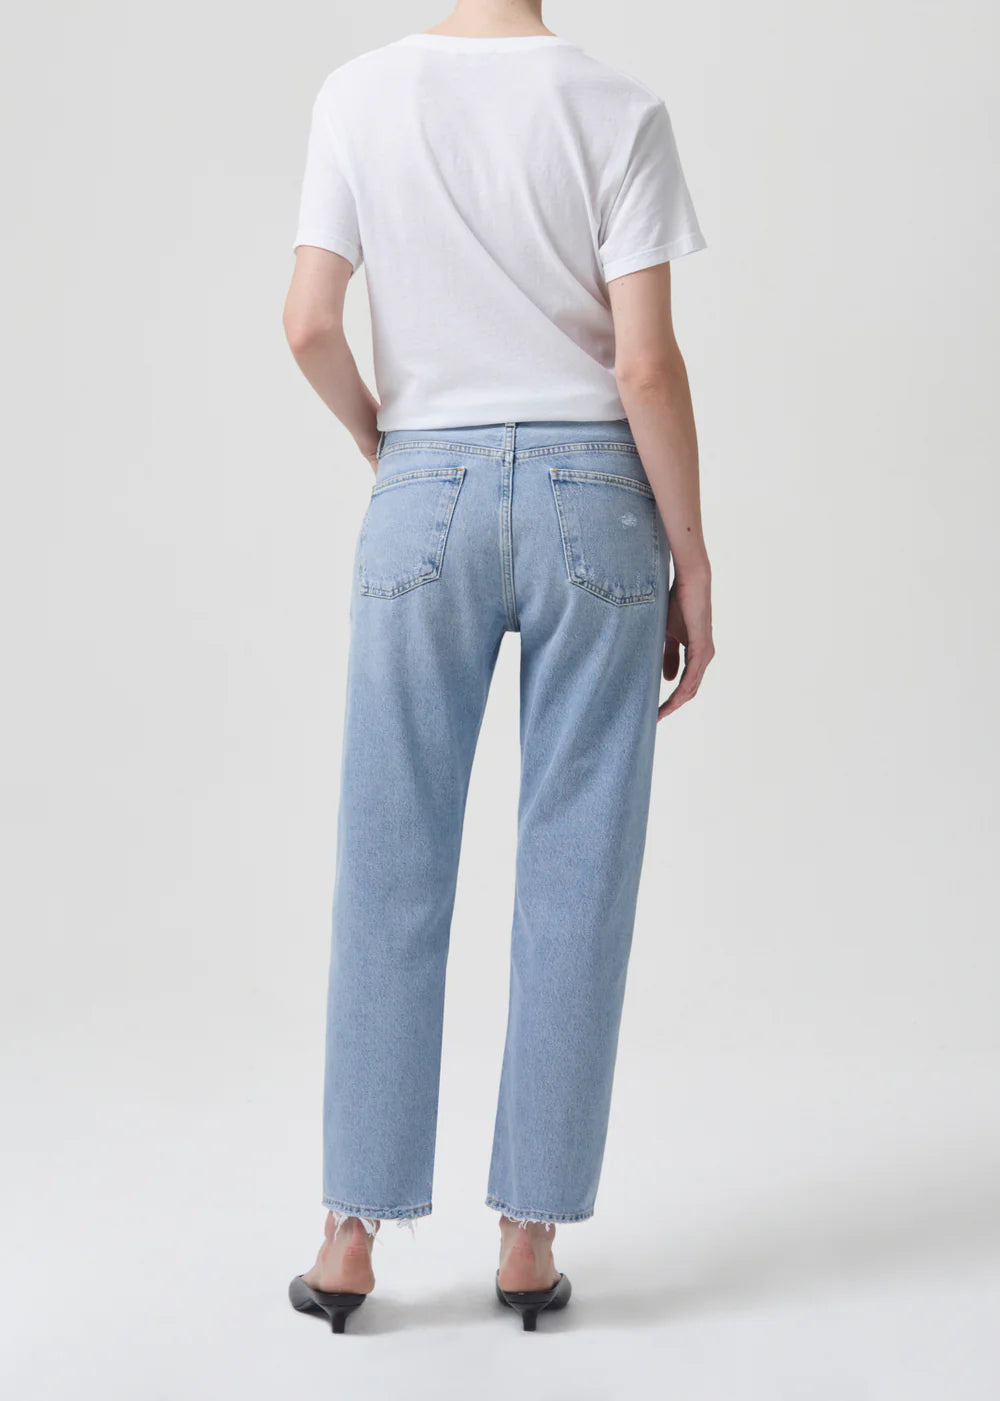 The back view of a woman wearing AGOLDE Parker jeans and a white t-shirt made of zero-stretch cotton.